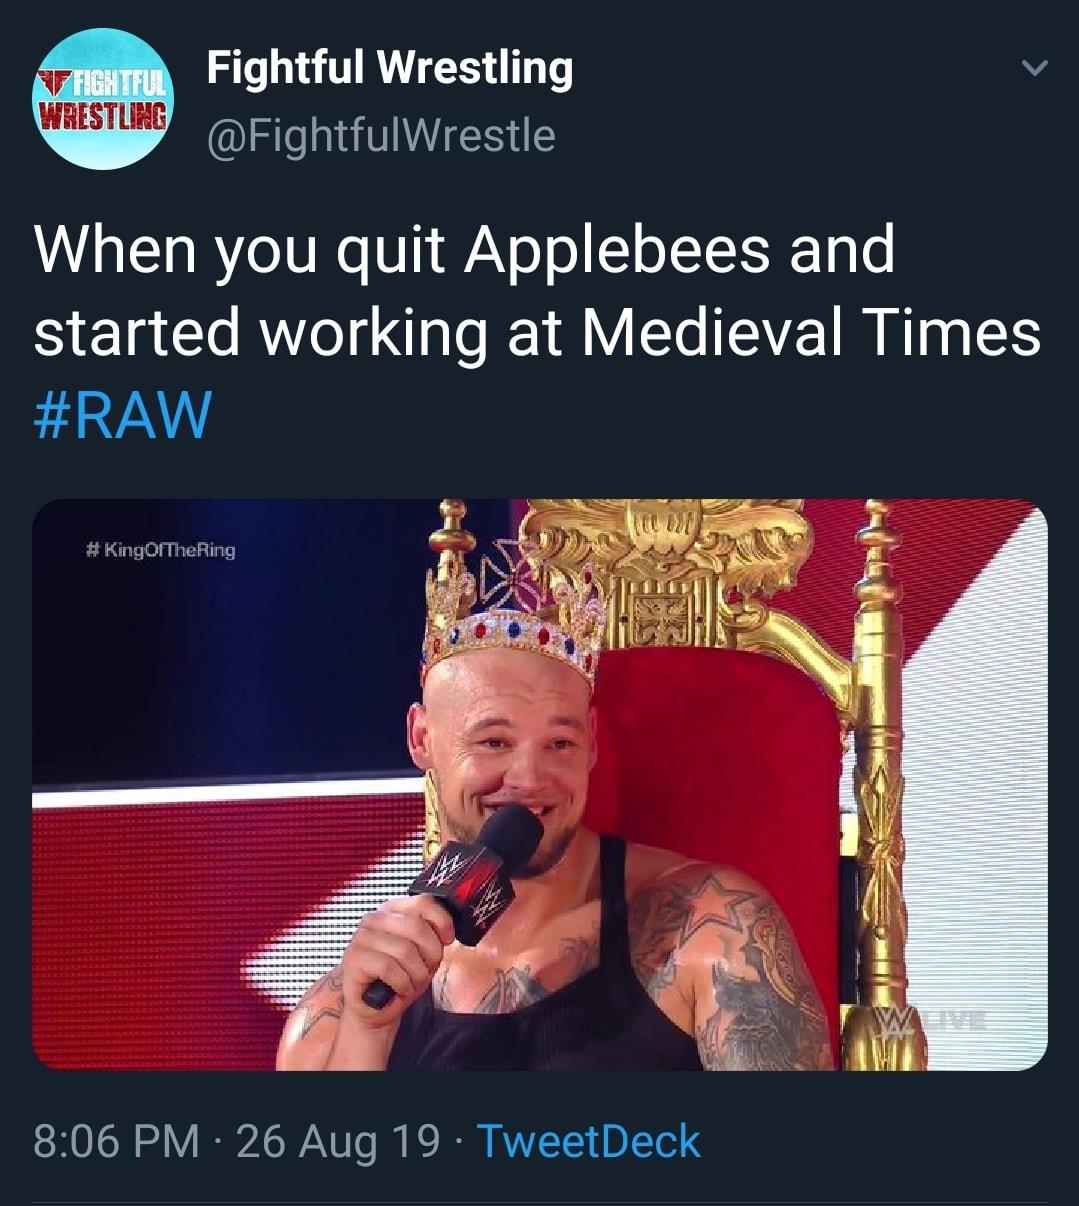 WWE wrestling memes - king of the ring winners - Wrestling Fightful Fightful Wrestling When you quit Applebees and started working at Medieval Times 26 Aug 19 TweetDeck Weve